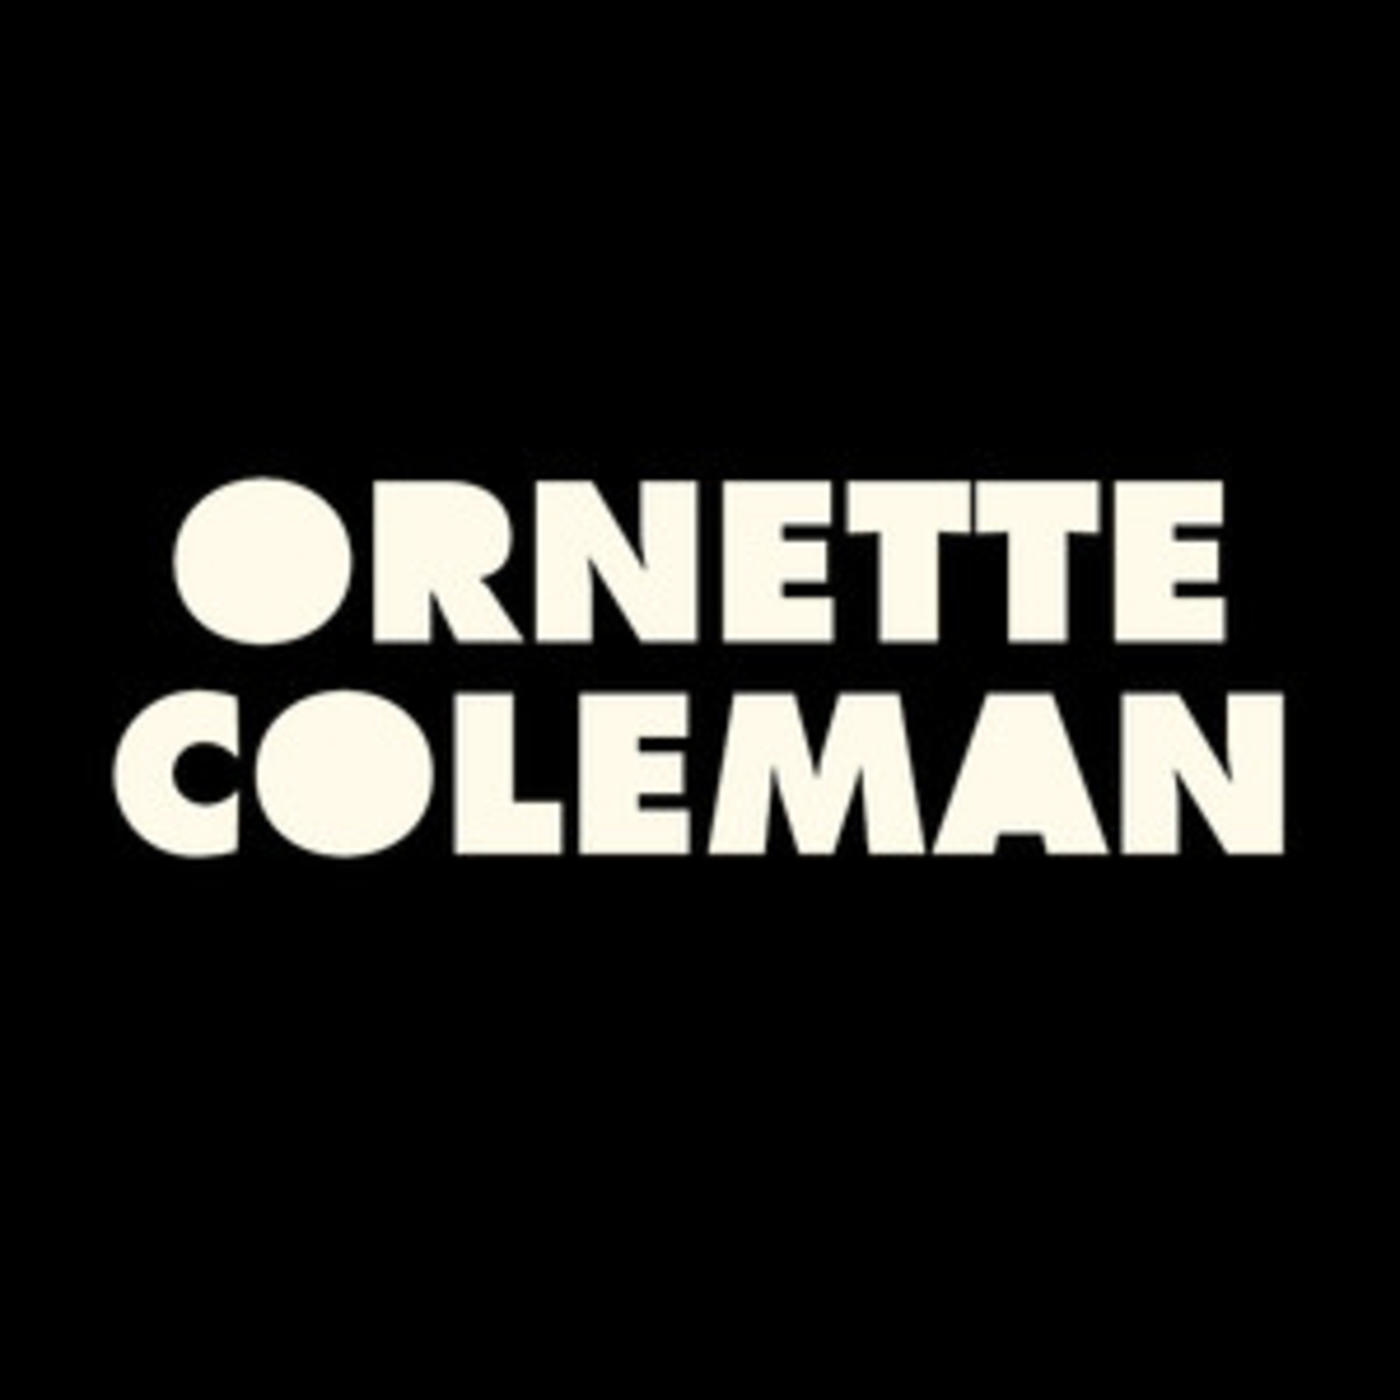 Official Ornette Coleman playlist - Lonely Woman, Peace, Eventually, Congeniality, Chronology, Free